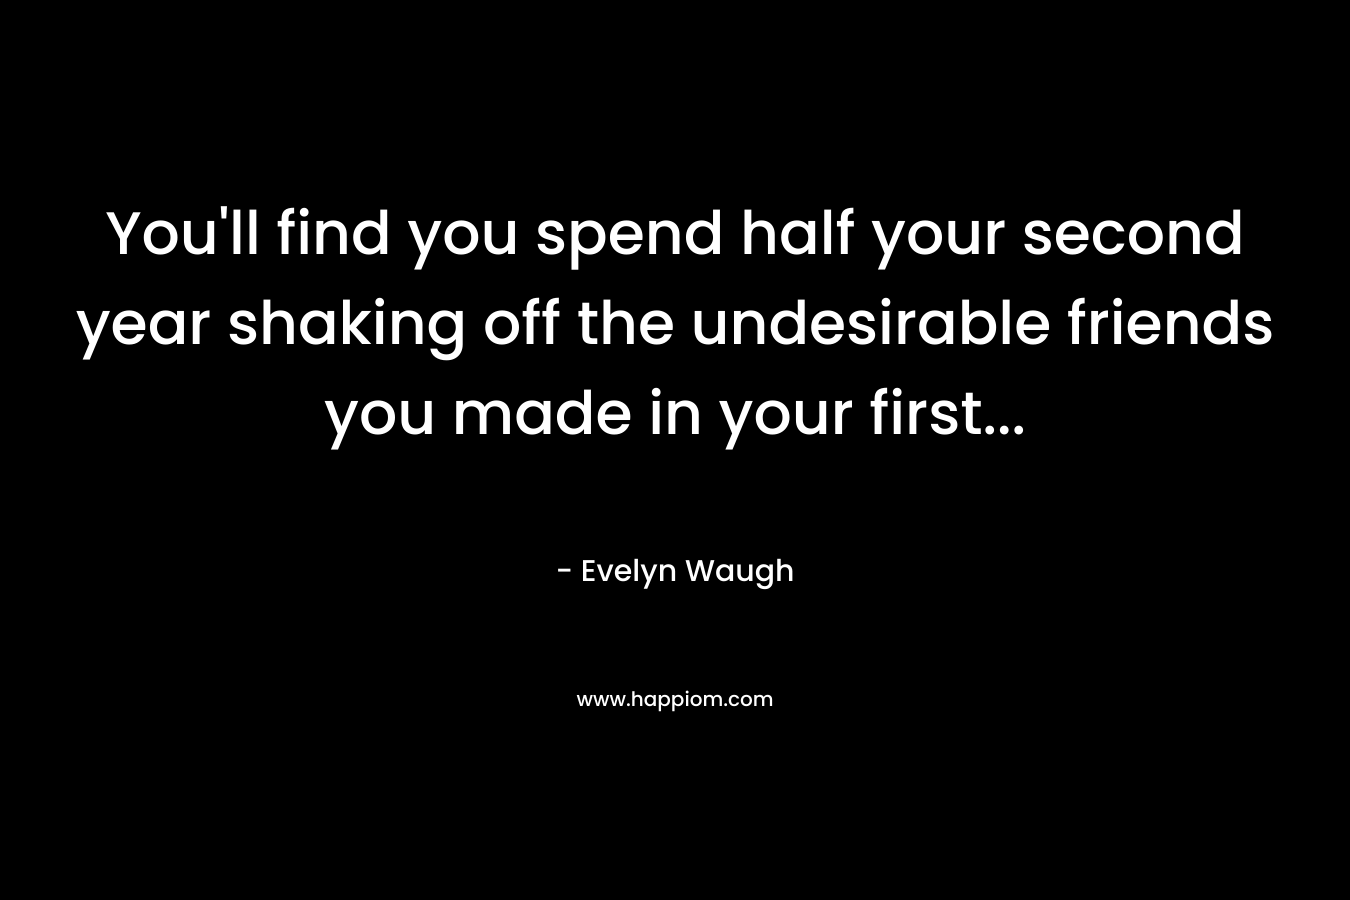 You'll find you spend half your second year shaking off the undesirable friends you made in your first...